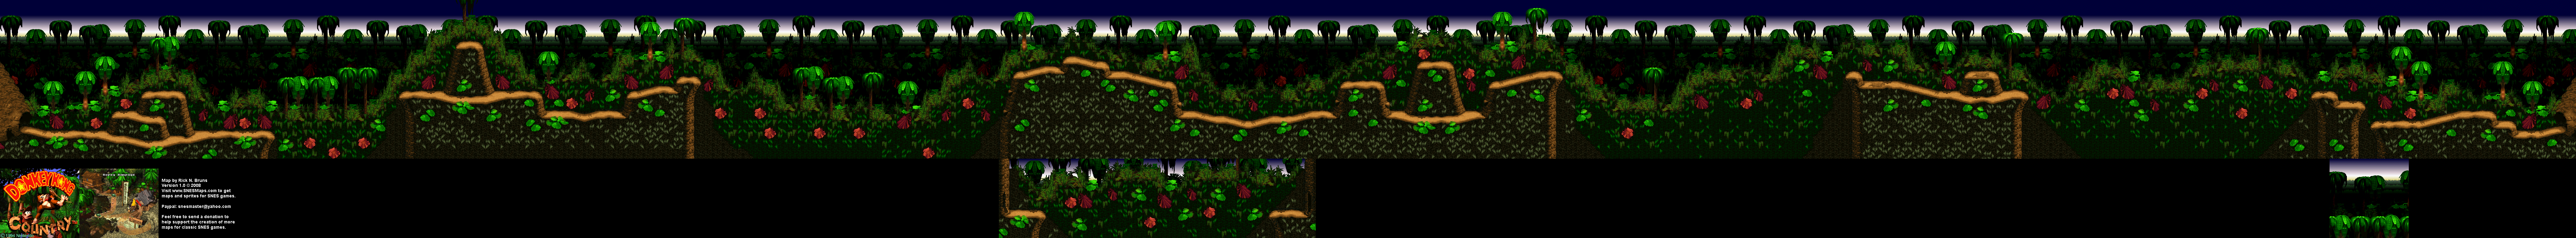 Donkey Kong Country - Level 2 - Ropey Rampage - Super Nintendo SNES Background Map